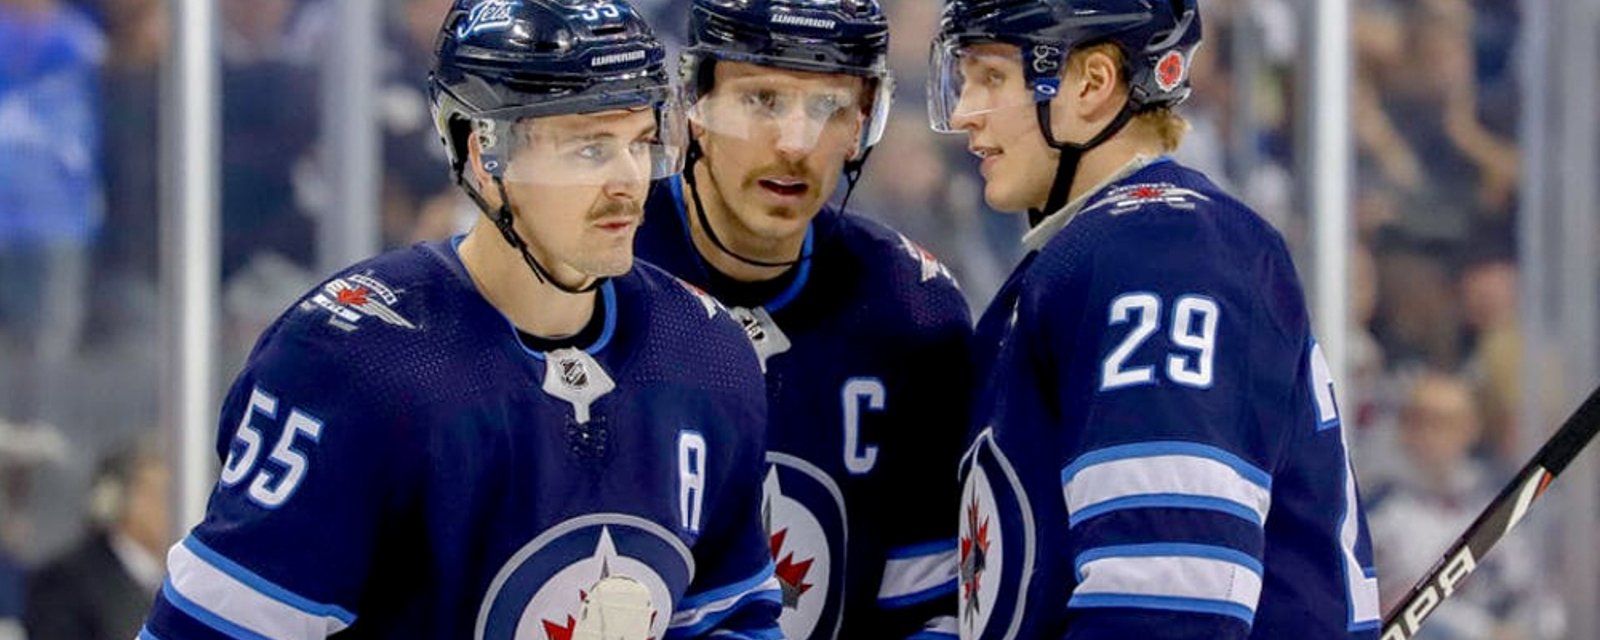 Finnish report goes behind the scenes of Laine trade, blames Wheeler, Scheifele and Coach Maurice